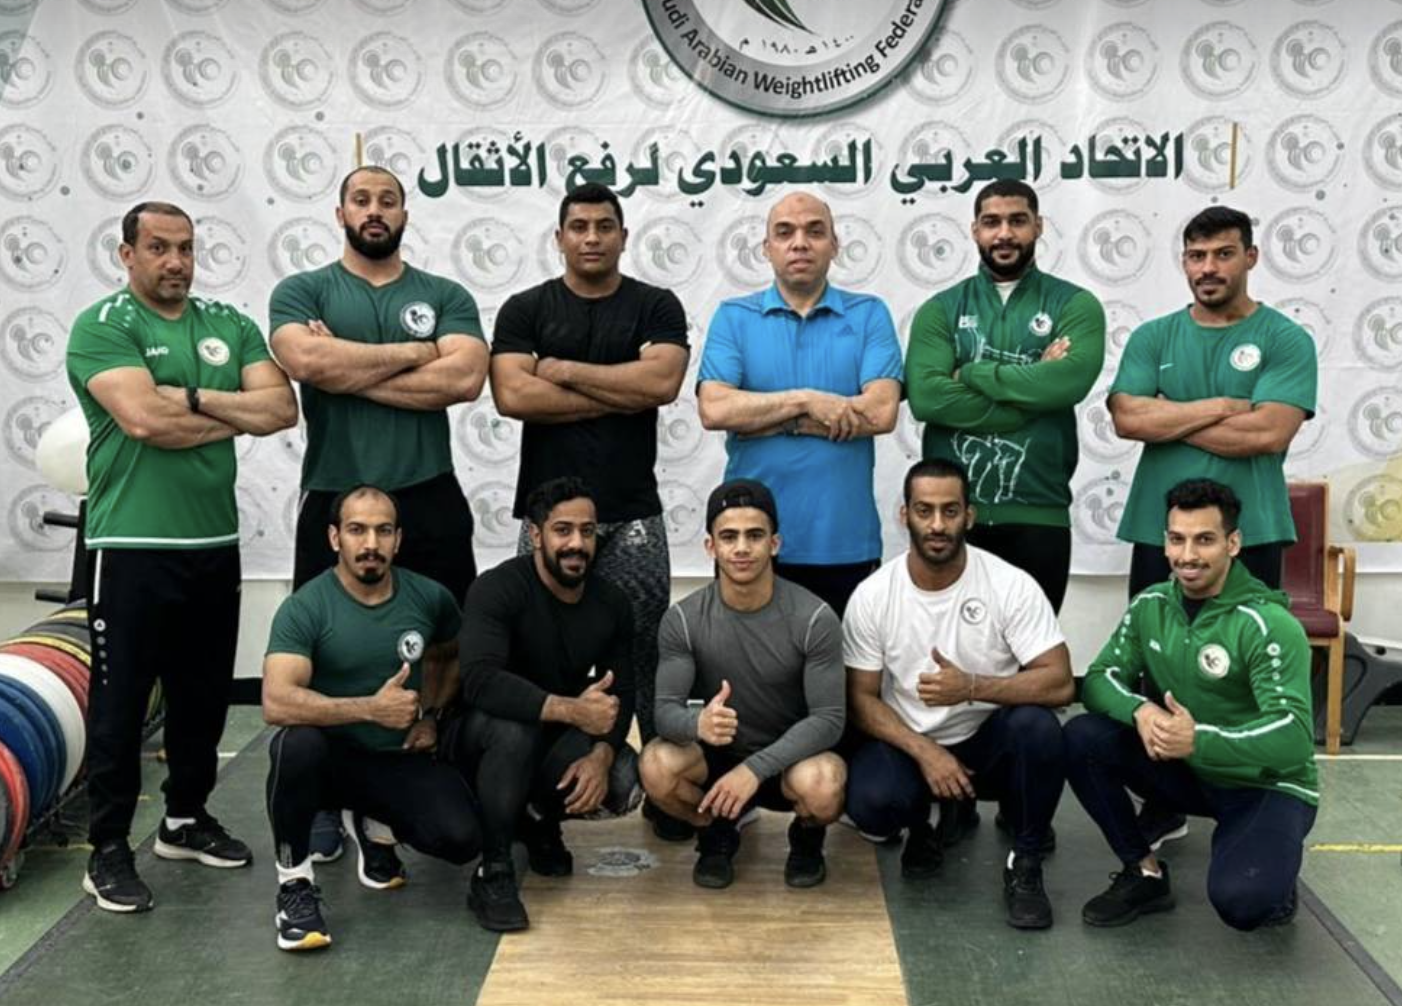 Khaled Korany pictured with the Saudi Arabian weightlifting team after being appointed their new national head coach ©Khaled Korany